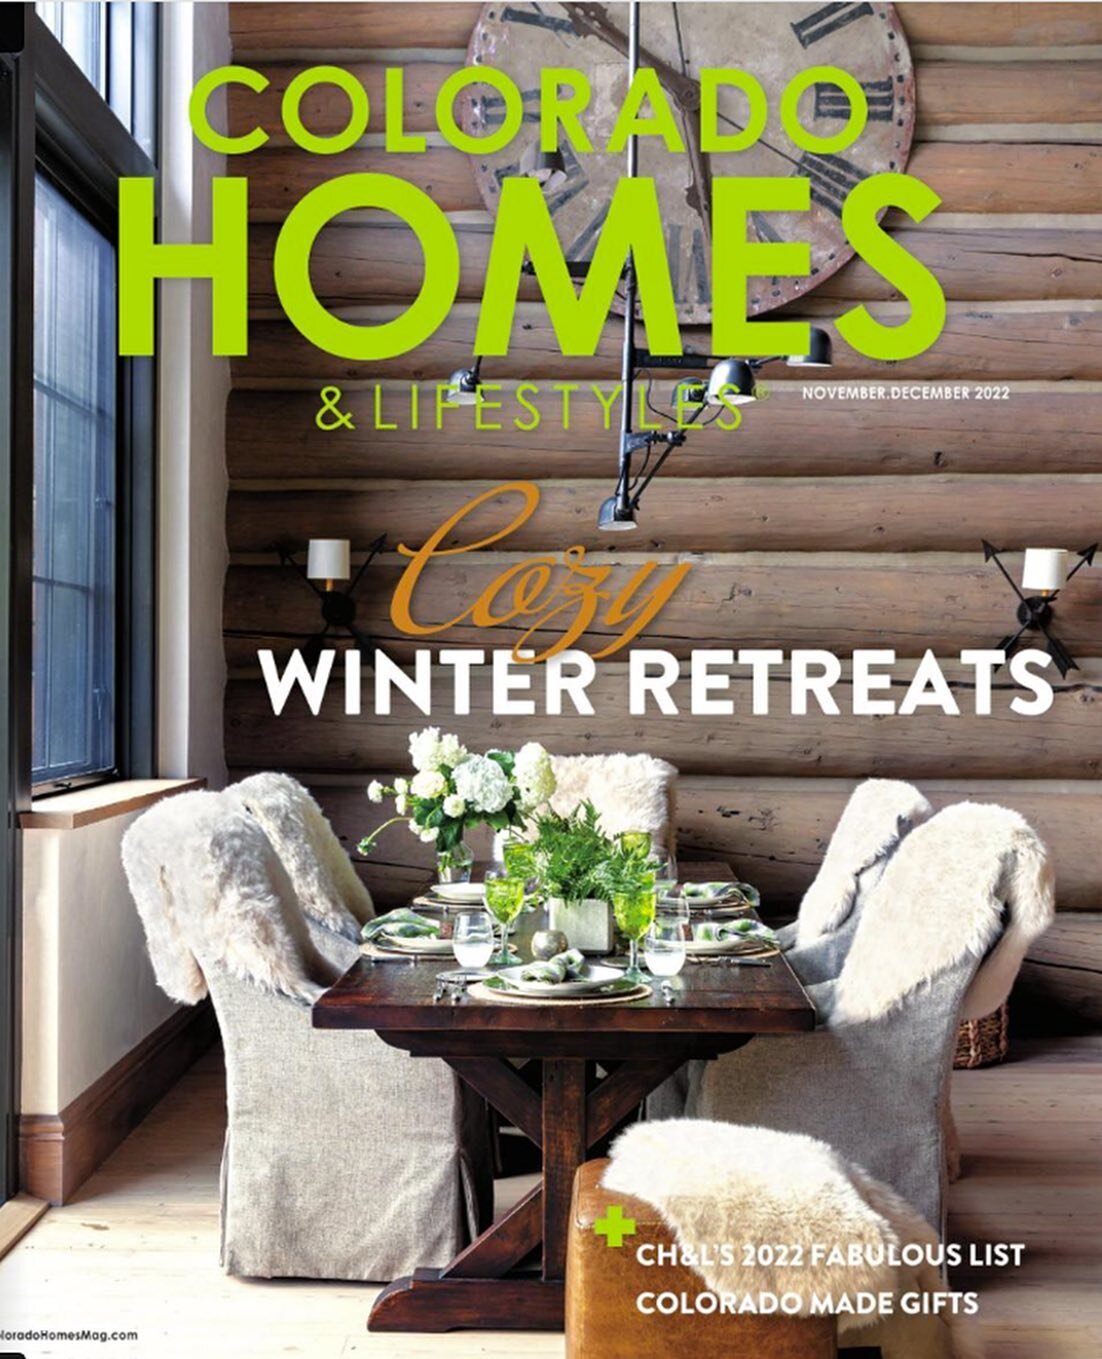 I am so thrilled that one of my favorite projects was featured in this month&rsquo;s Colorado Homes and Lifestyles magazine!  It&rsquo;s on Newstands now.  I can&rsquo;t wait to share more photos with you soon. 

.
.
Photos: @kathypedenphotography 
D